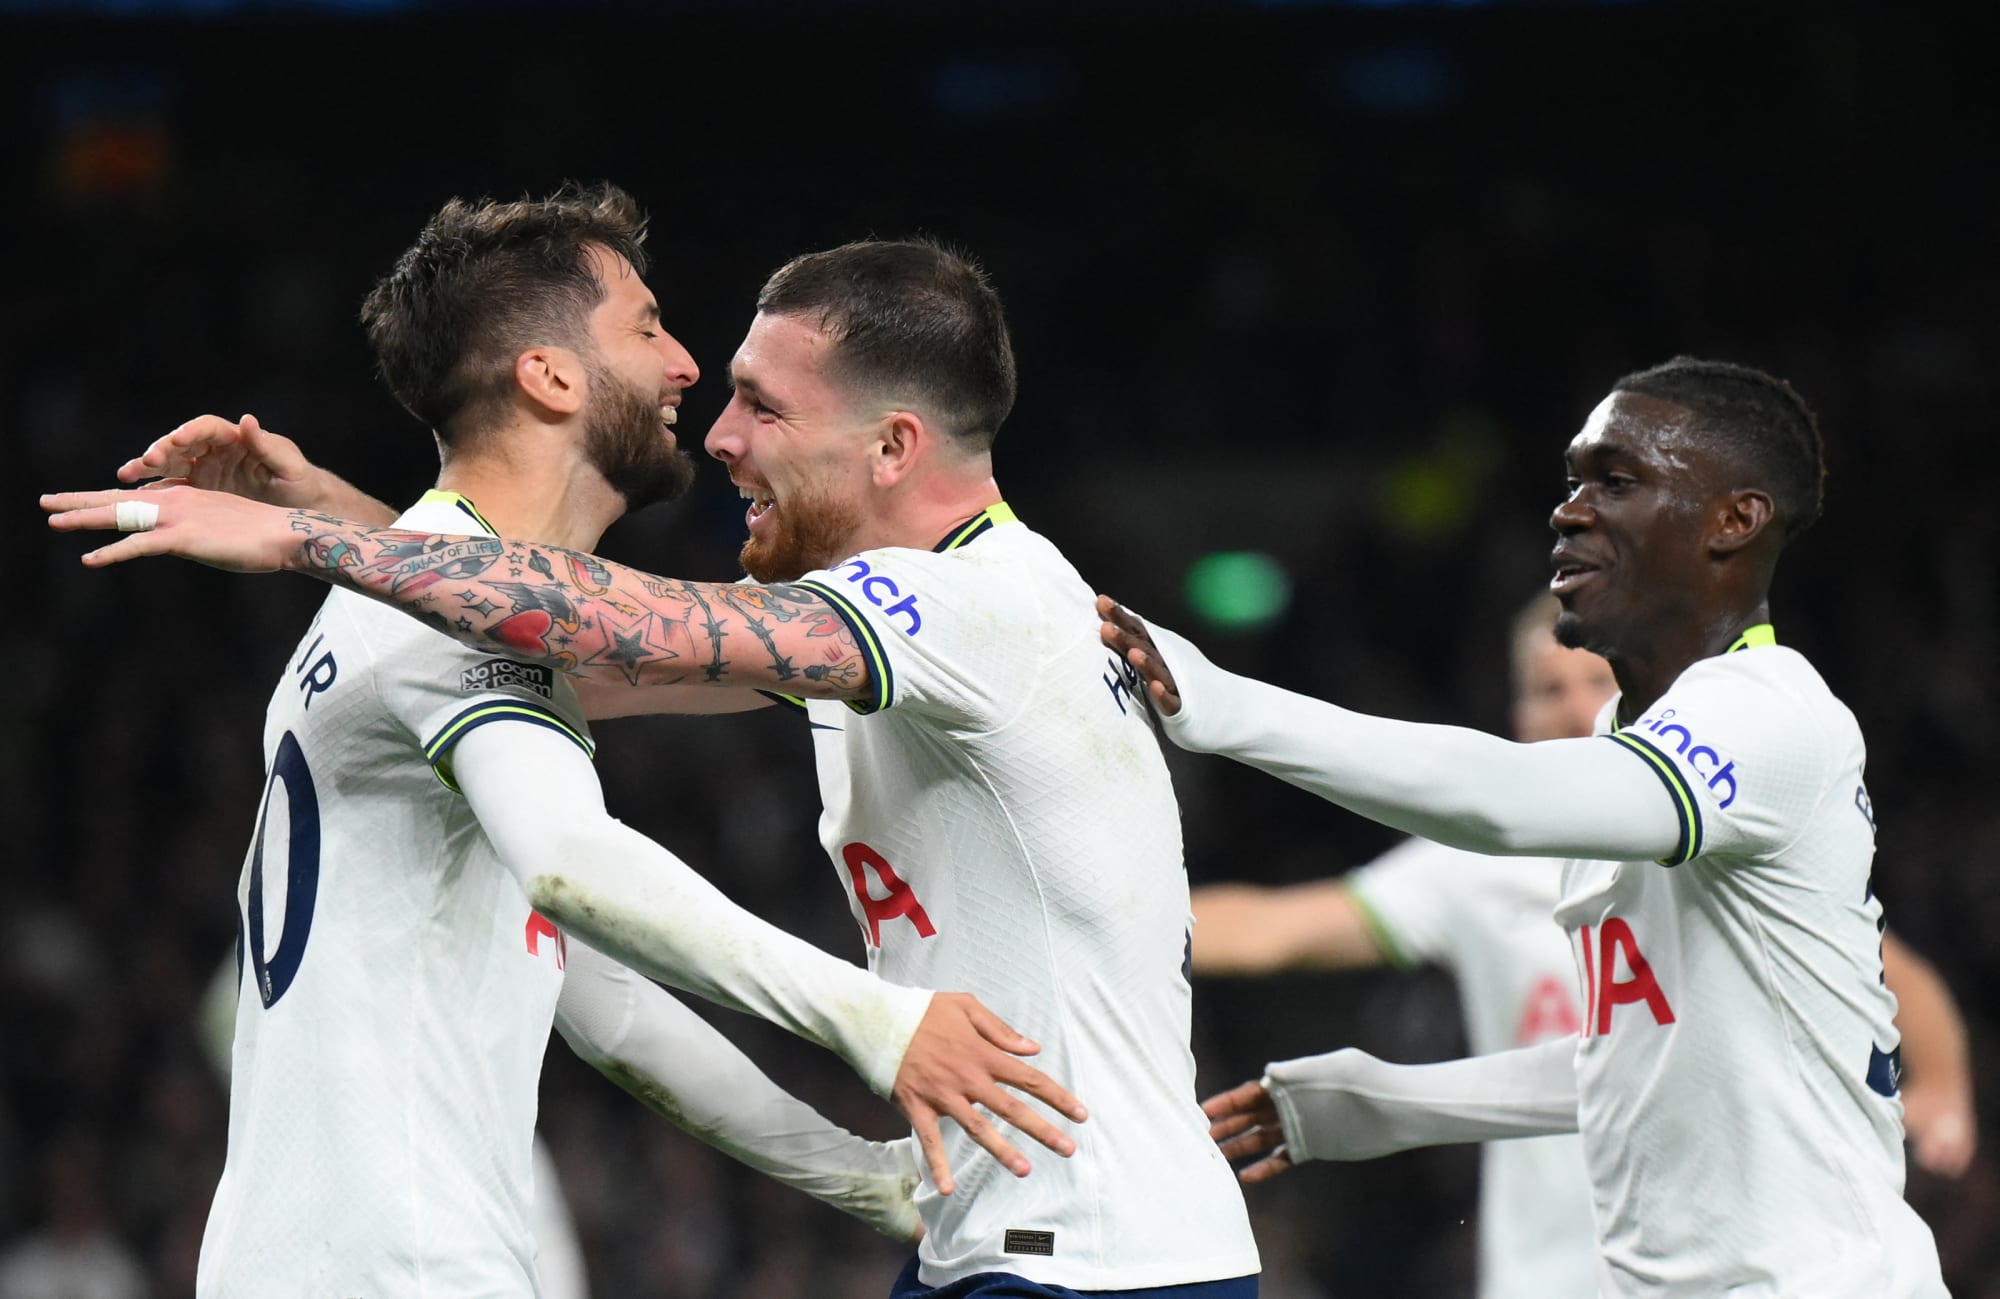 Three Takeaways from 2-0 Tottenham win over the Toffees